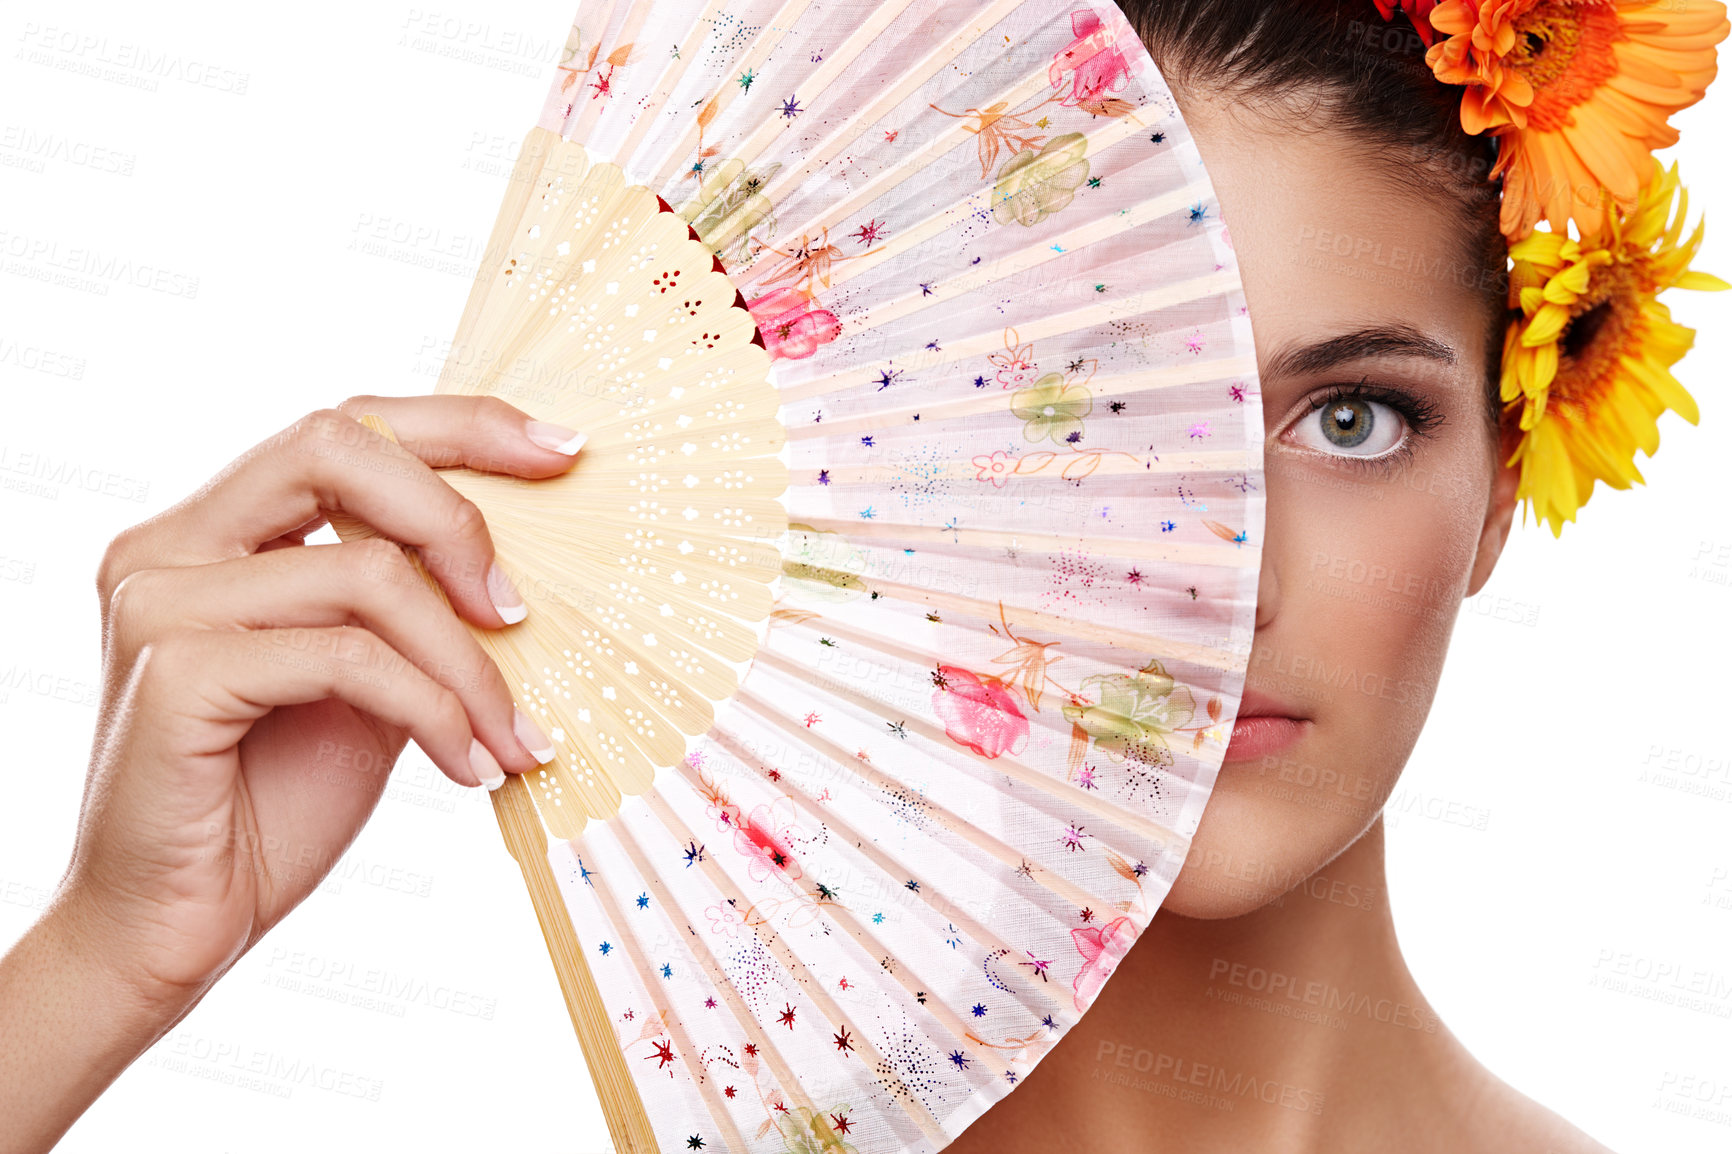 Buy stock photo Cropped portrait of a beautiful young woman wearing a crown of flowers while holding a fan in front of her face